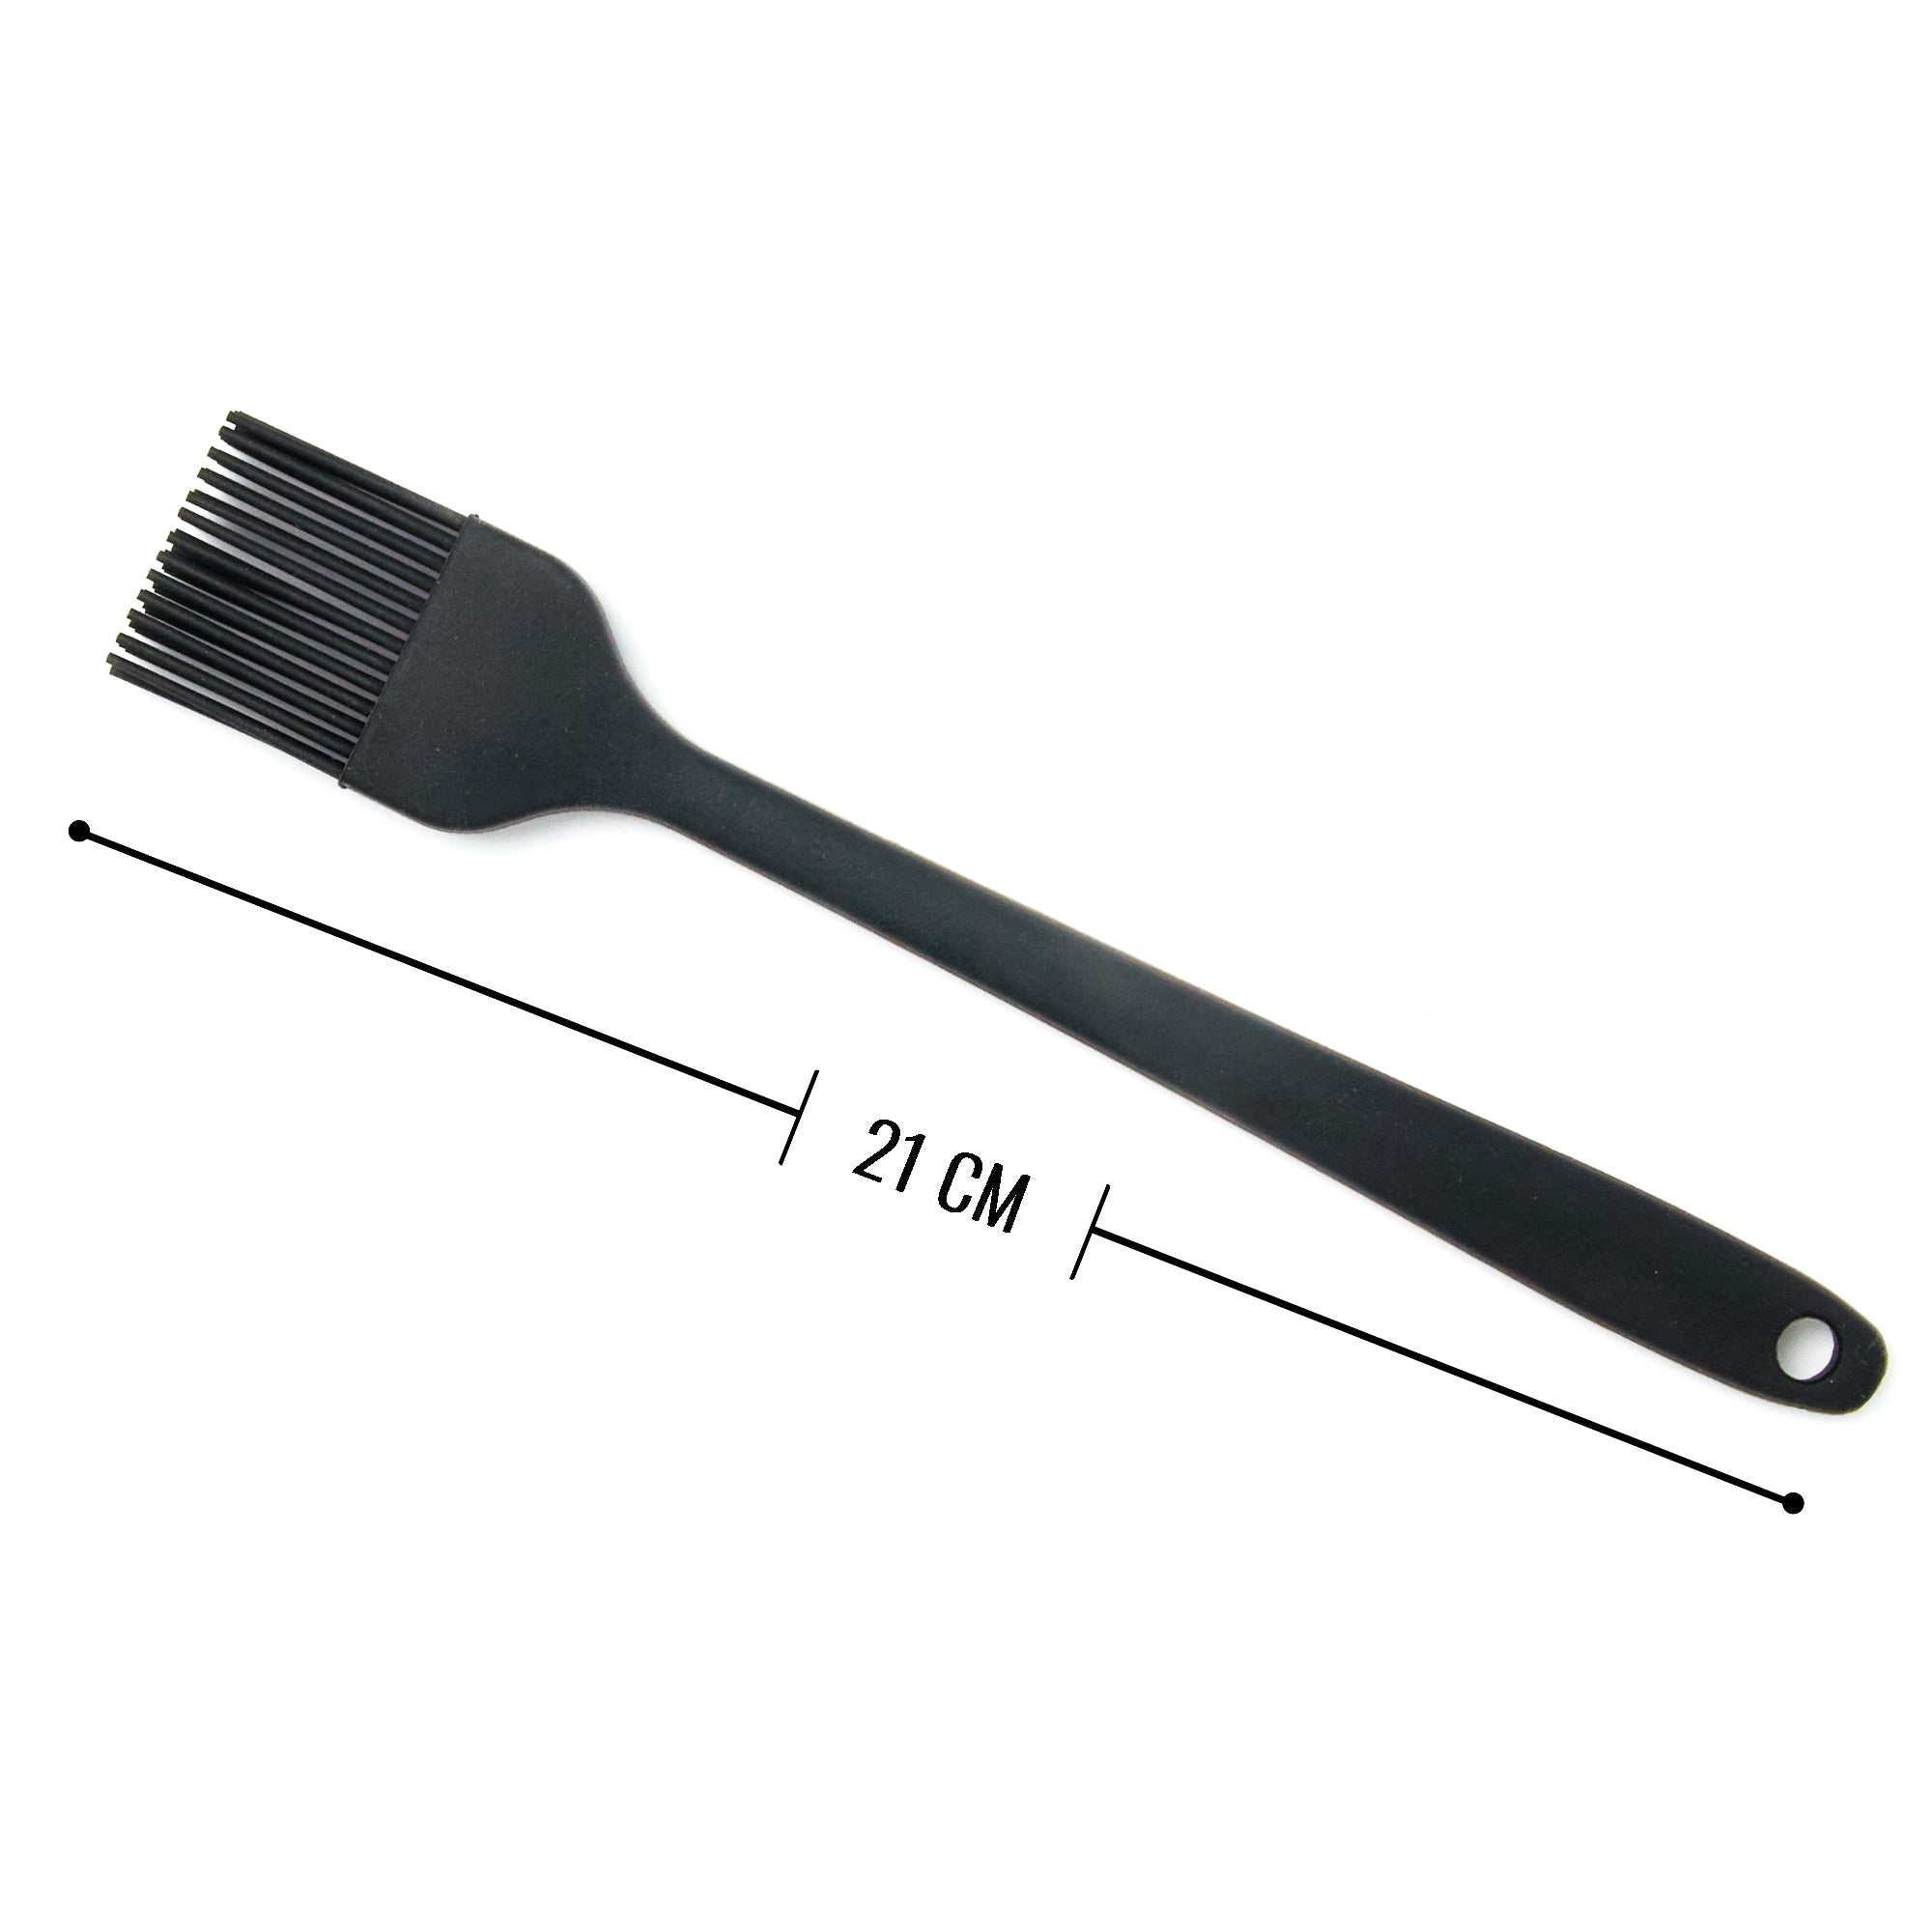 Cooking grill brush